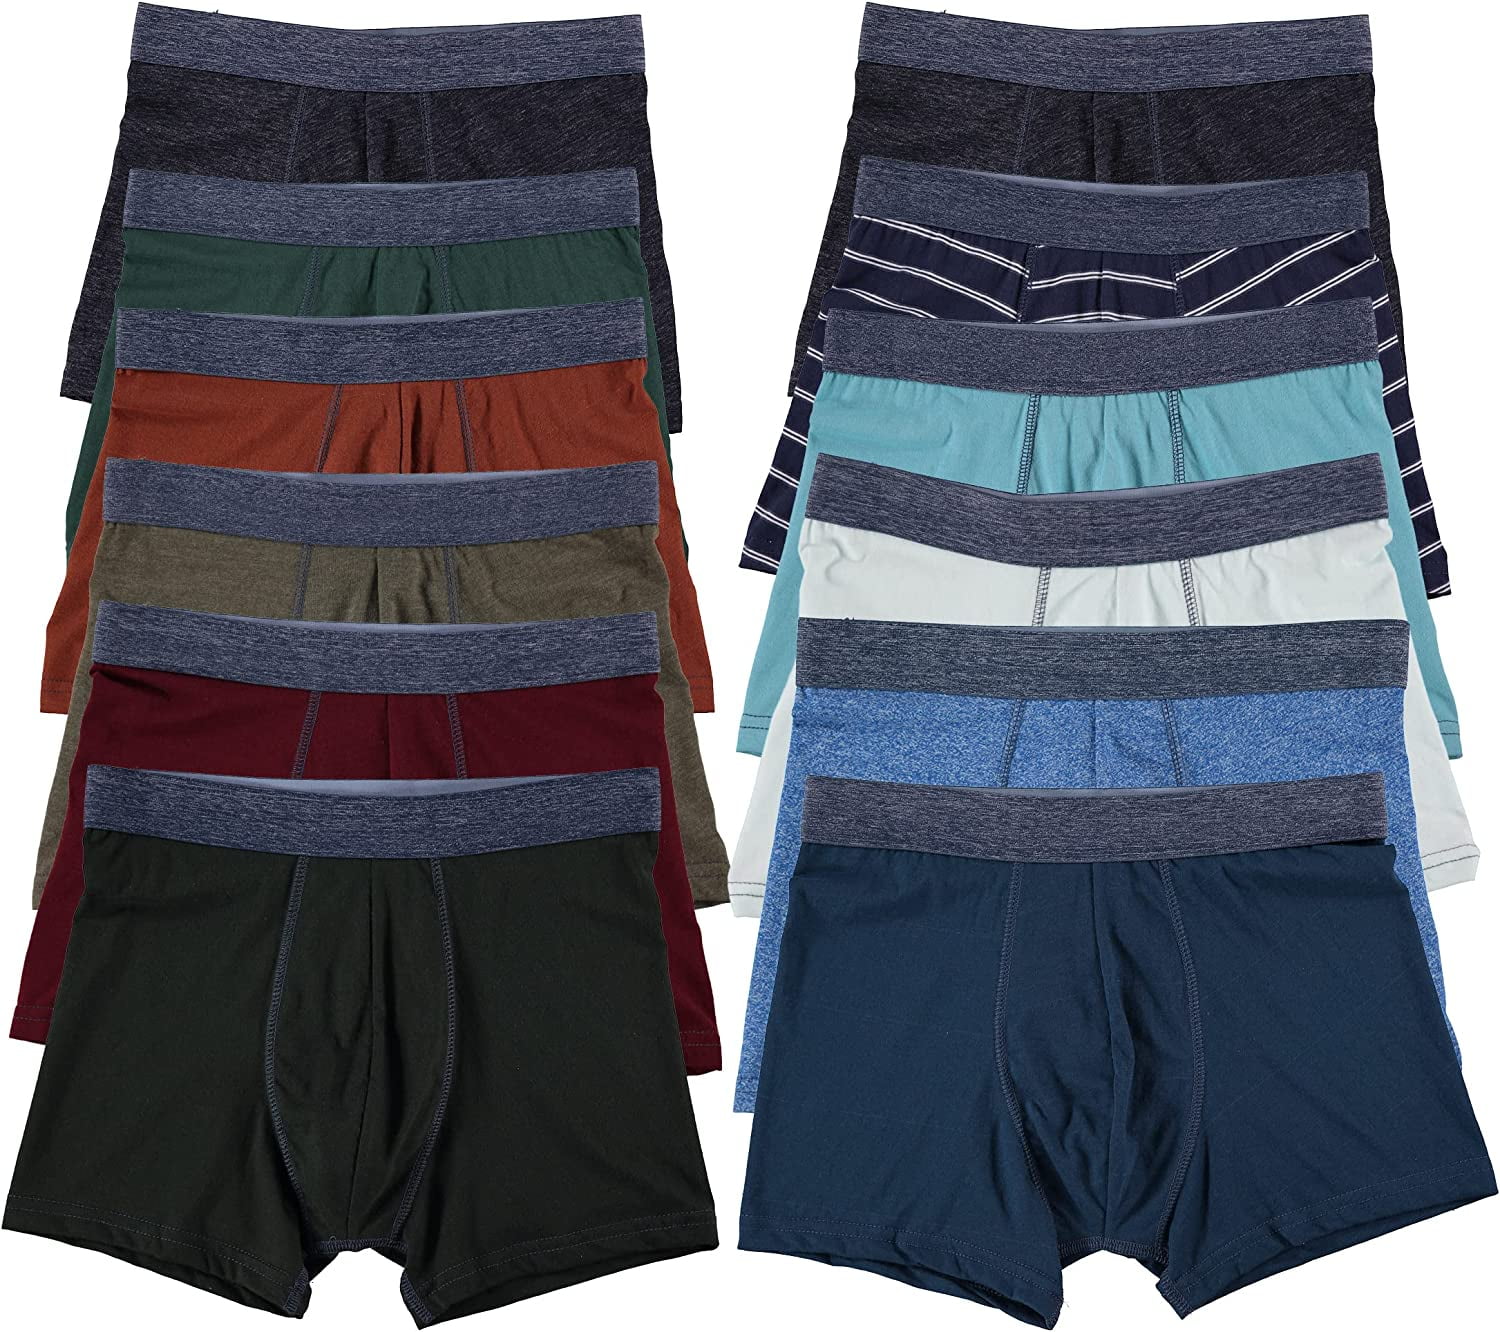 Hanes Best 5-Pack Boxer Brief (Assorted Colors) 